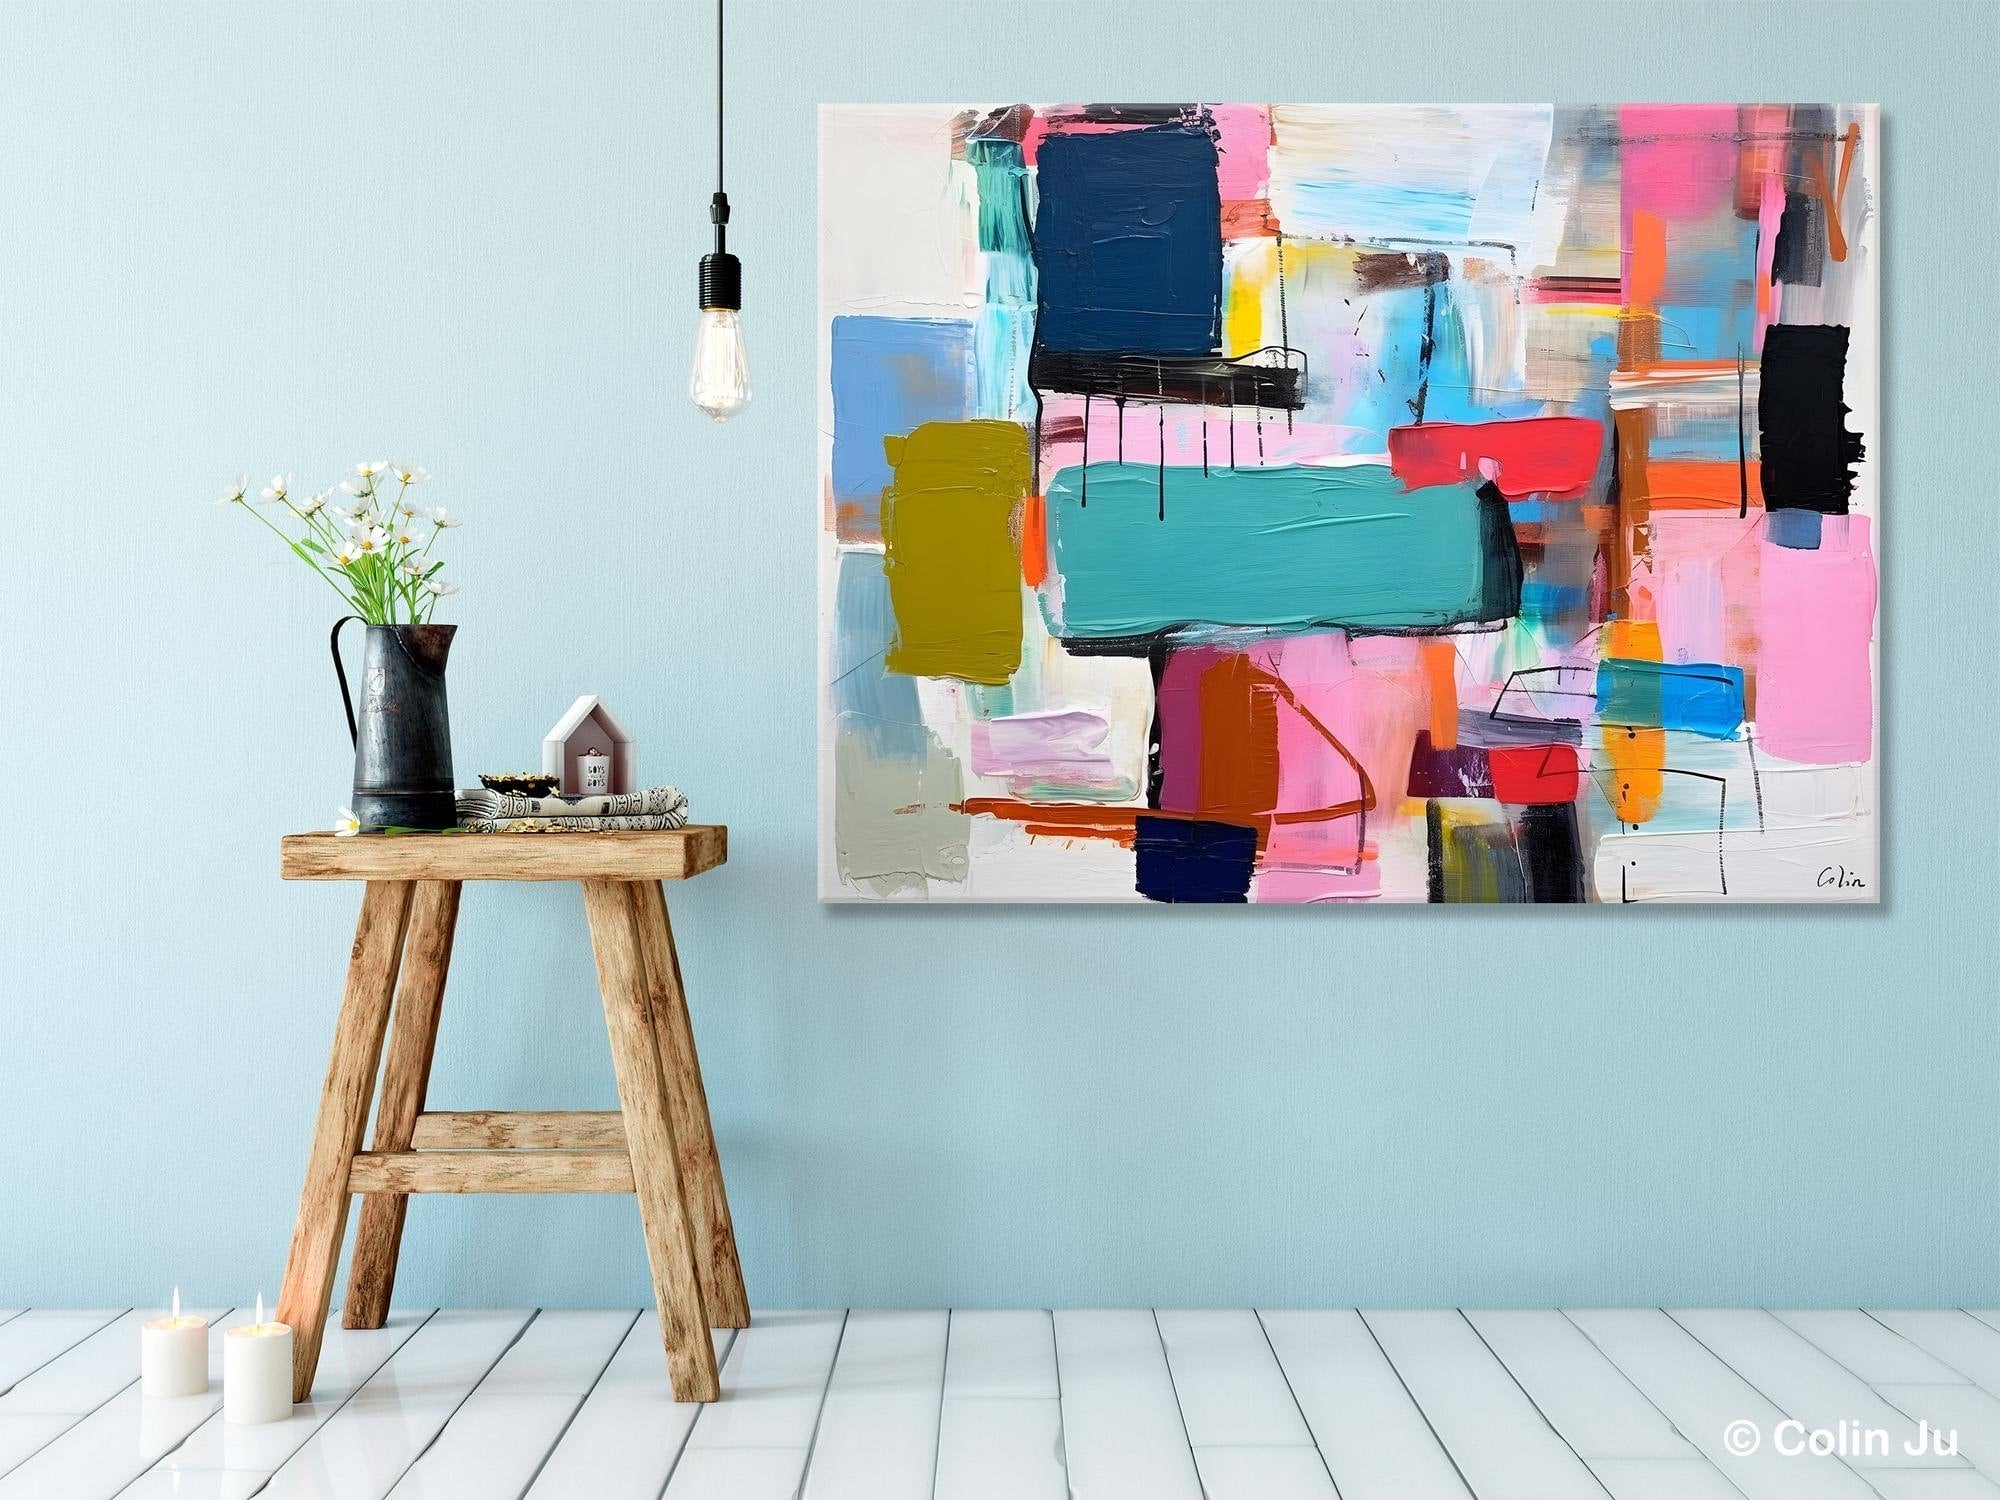 Original Abstract Art Paintings, Hand Painted Canvas Art, Acrylic Painting on Canvas, Large Canvas Art for Sale, Large Painting for Bedroom-Art Painting Canvas